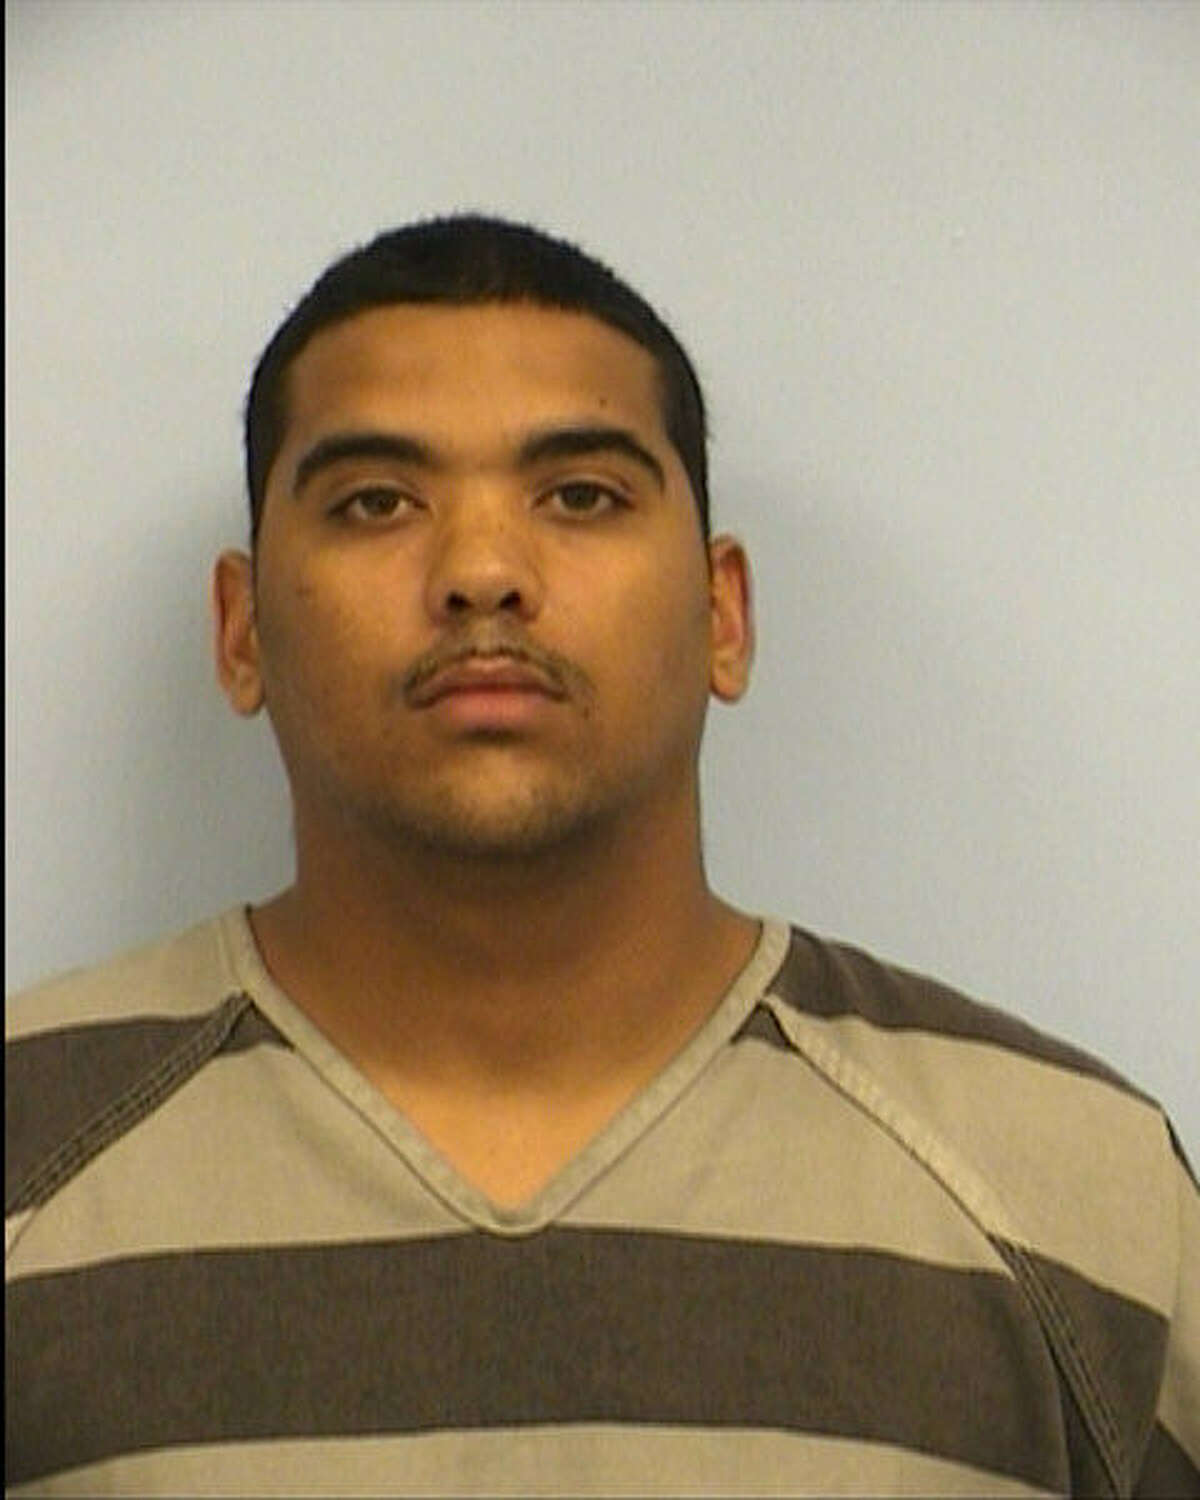 Sgt. Jeremy Bolen was accused of raping a woman in Austin in May of 2013. He was arrested in Killeen. READ MORE: Fort Hood GI jailed in rape, kidnapping case